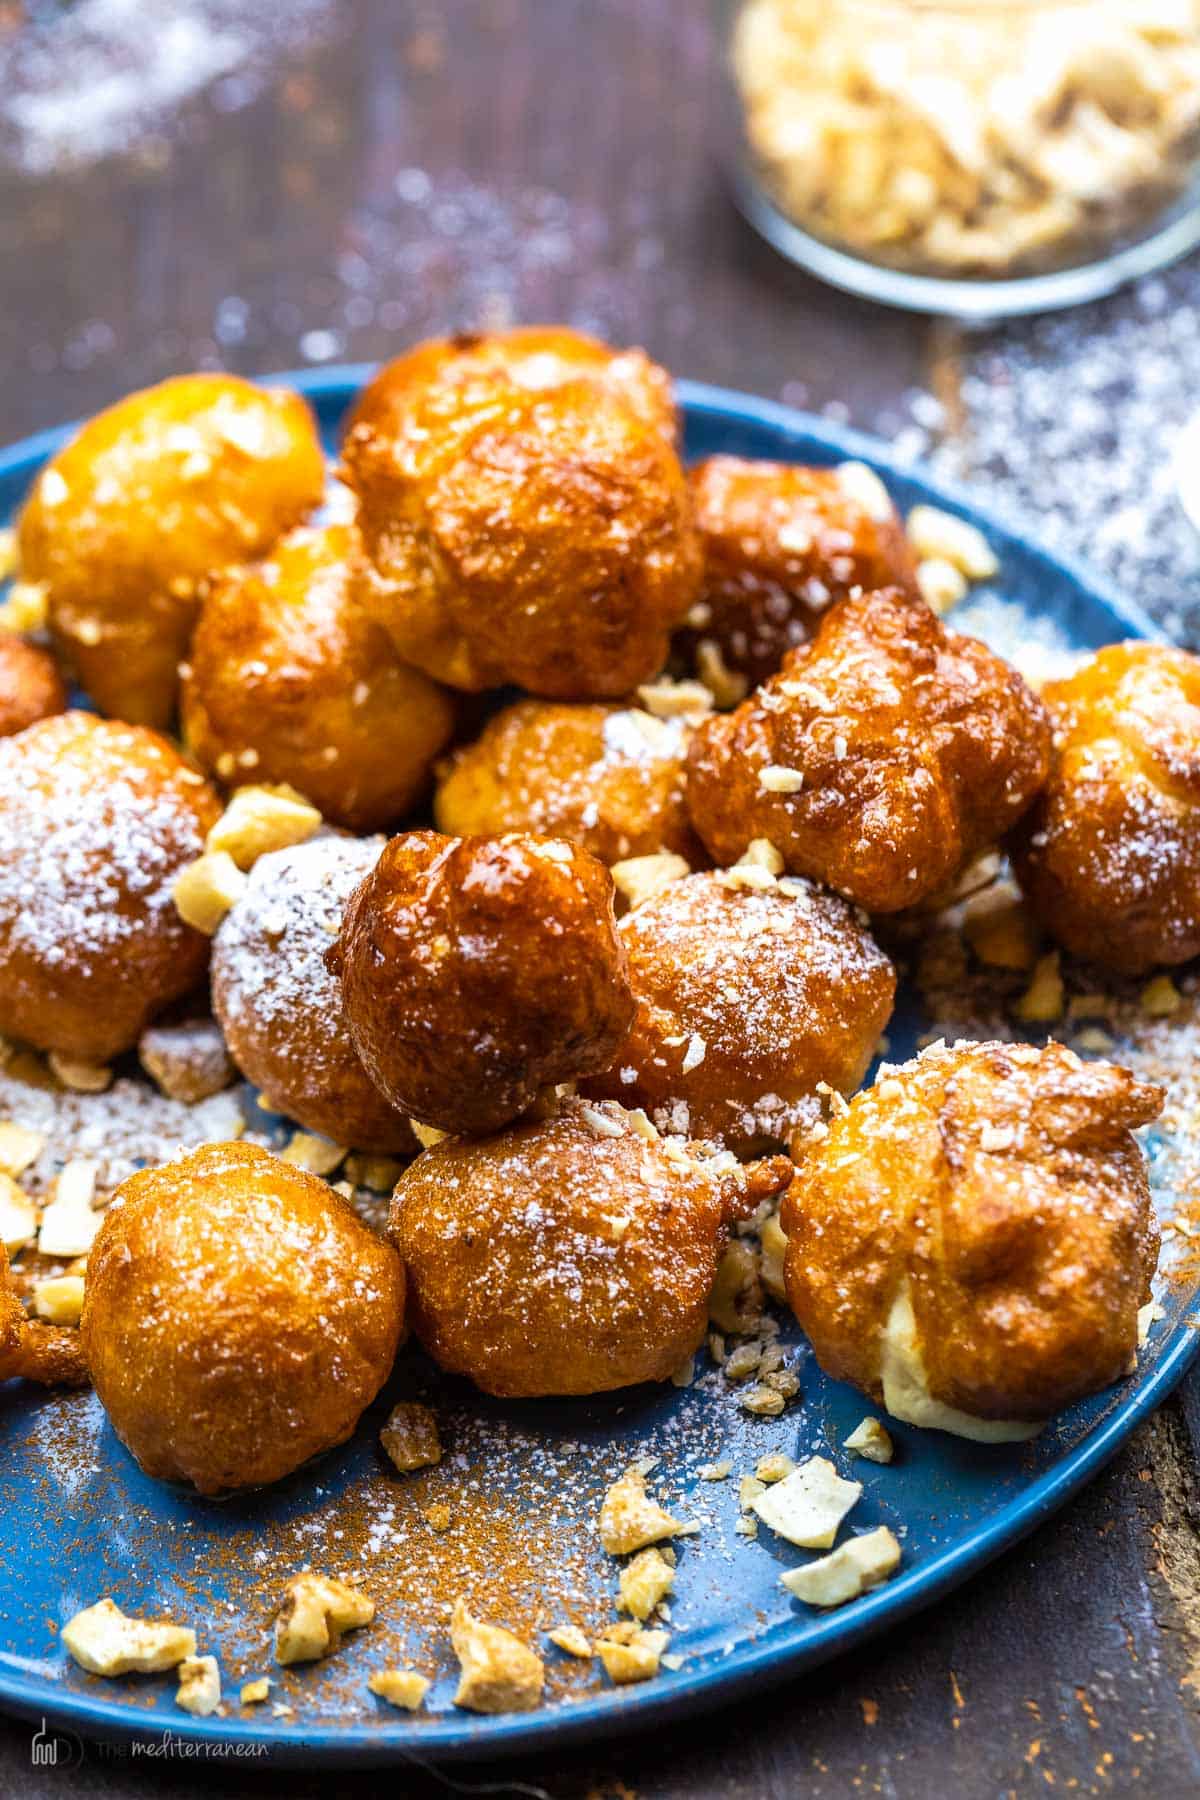 Greek donuts with topped topped with crushed nuts